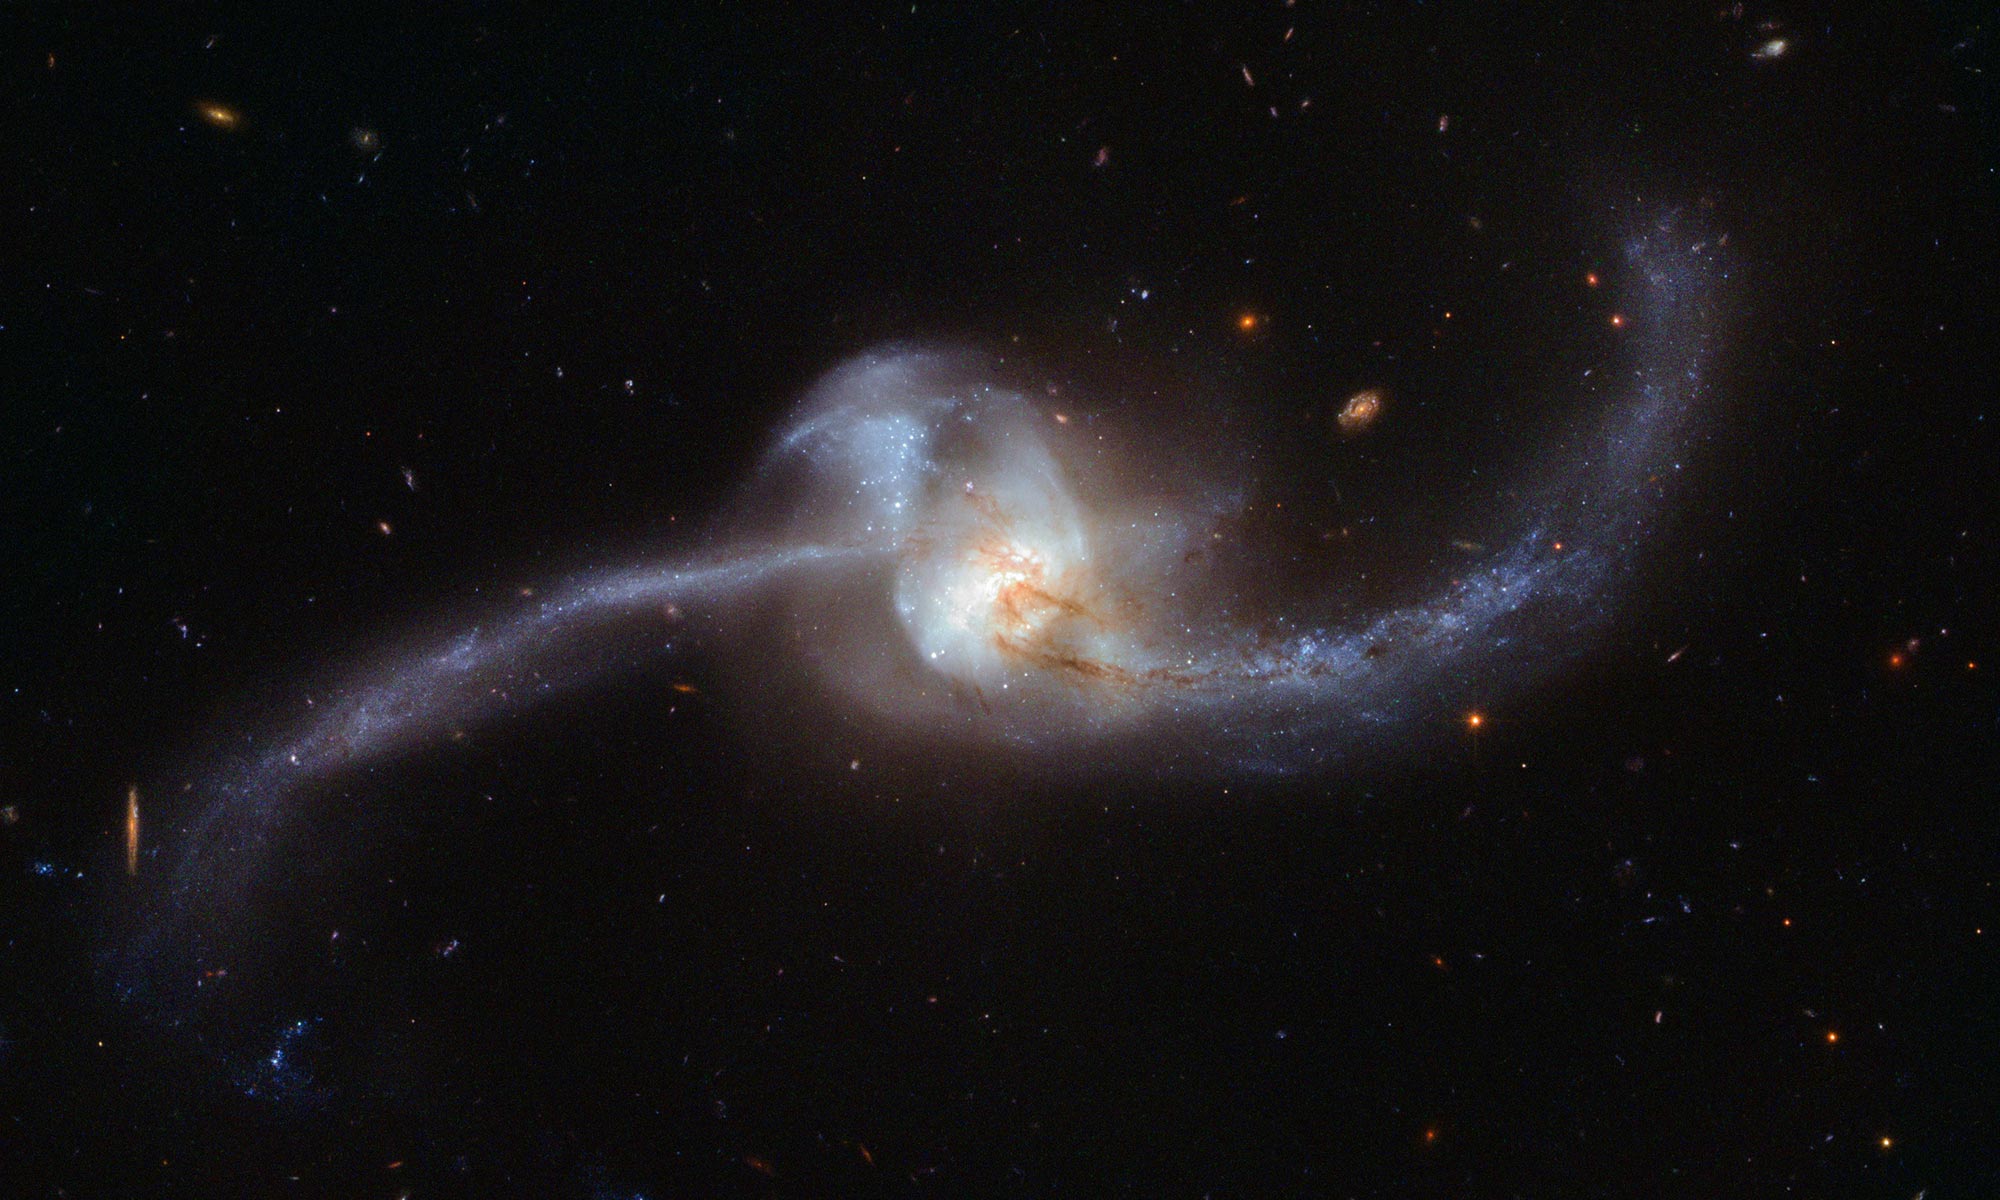 Merging Galaxies Spotted by Hubble Space Telescope